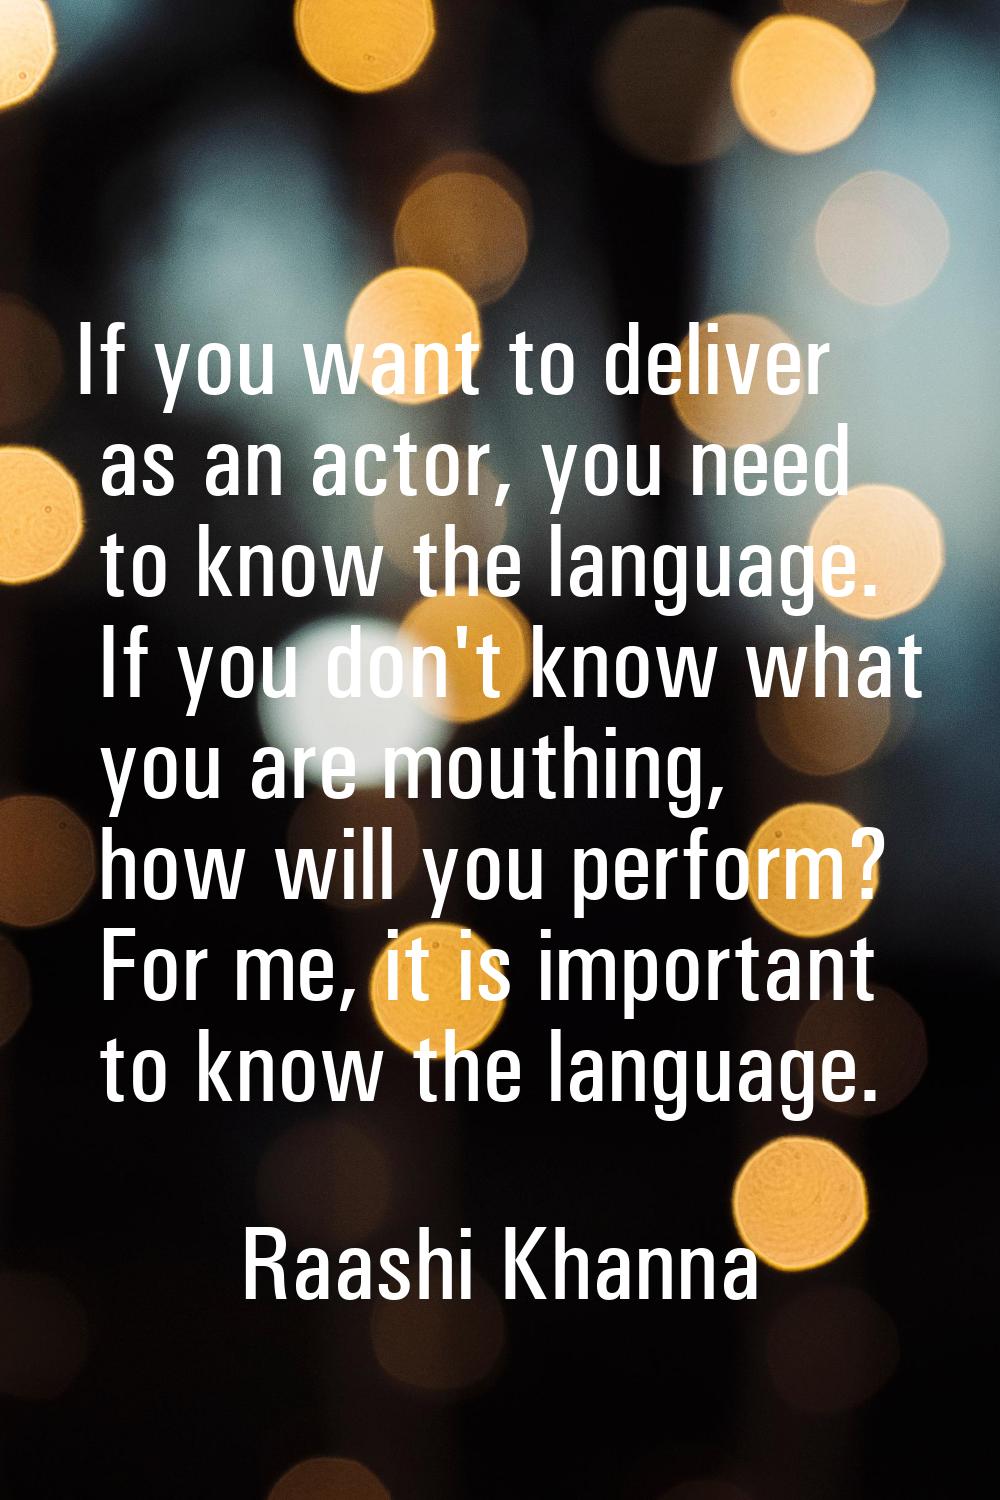 If you want to deliver as an actor, you need to know the language. If you don't know what you are m